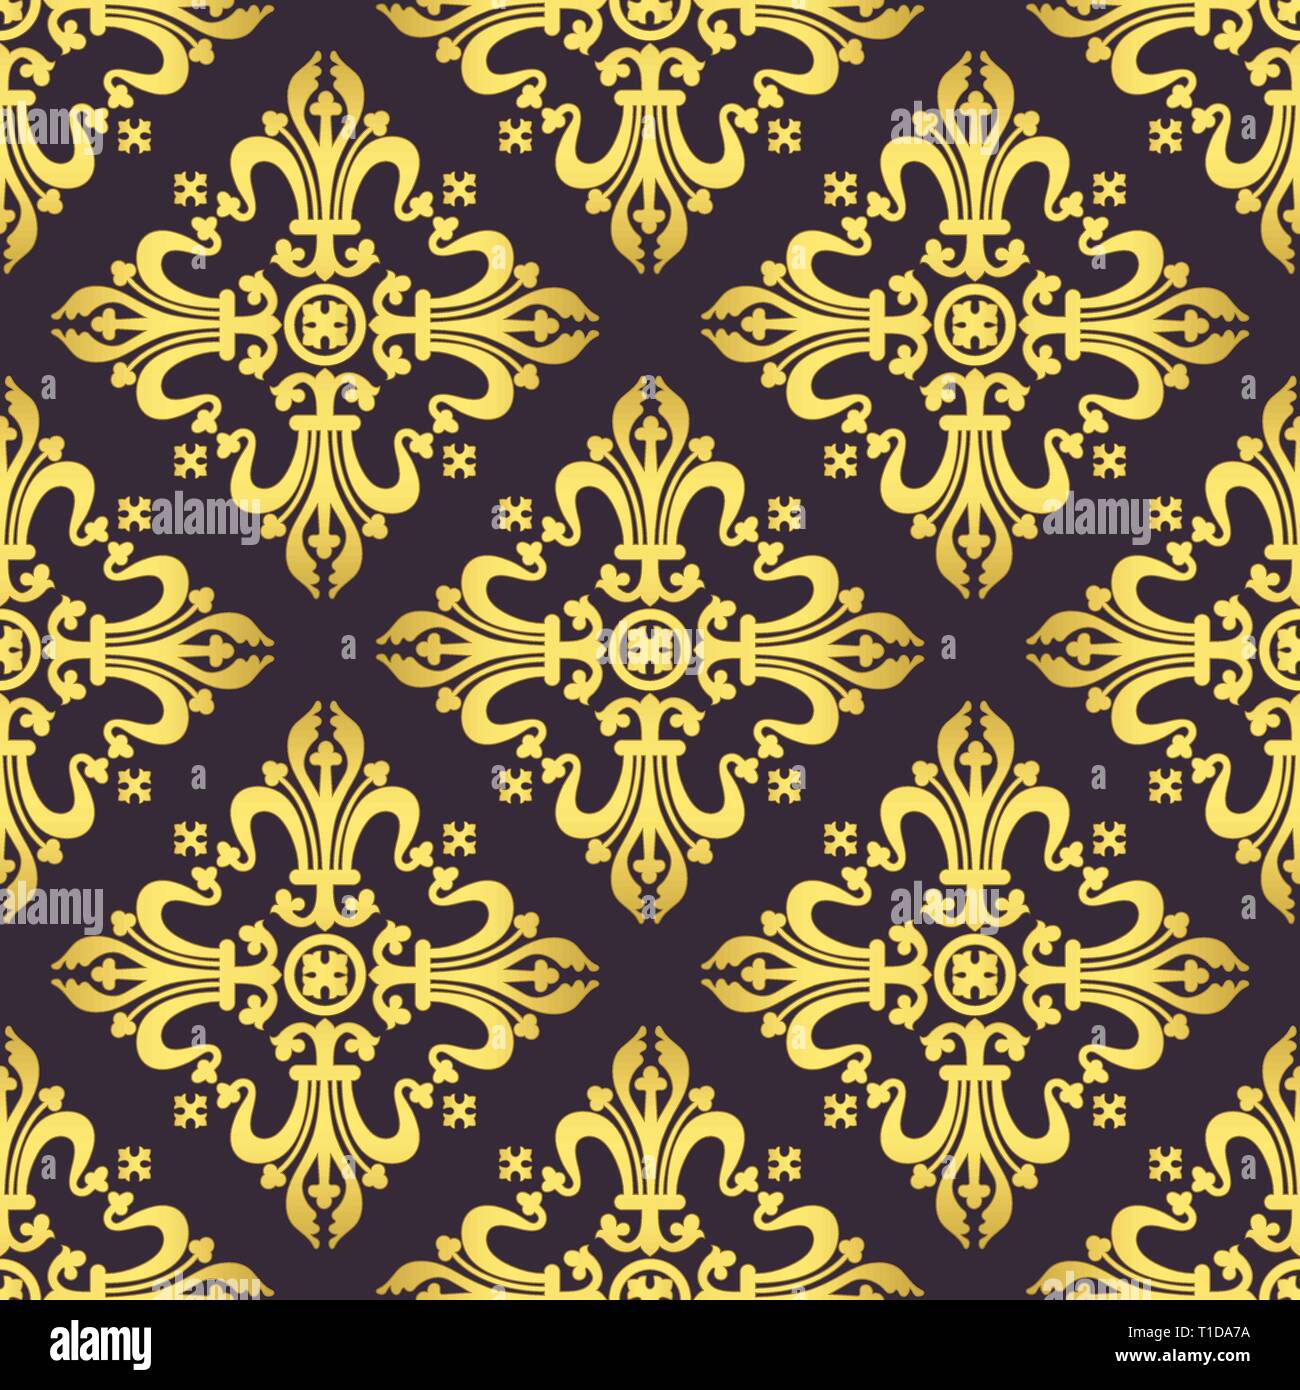 Vintage baroque ornament, damask floral luxury seamless pattern, vector illustration. Gold oriental tracery on dark purple background, retro antique r Stock Vector